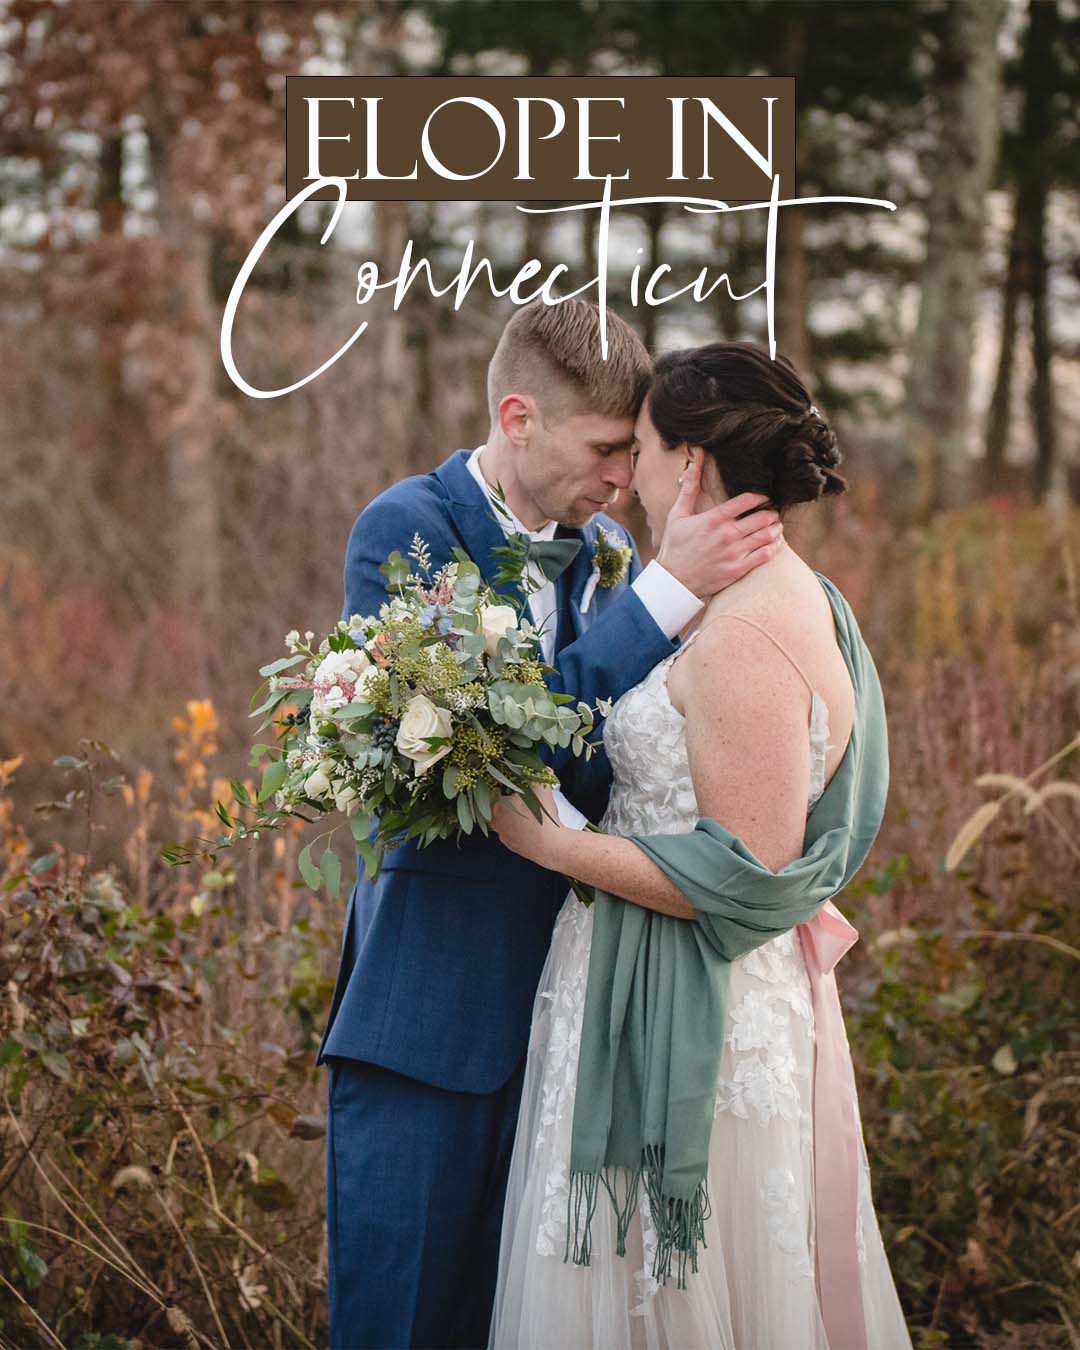 elope CT 1 8x10 1 Elopements and non-traditional micro-weddings are on the rise! If you want to elope in Connecticut, this post is full of elopement planning tips, as well as suggestions for some of the best places to elope in CT.